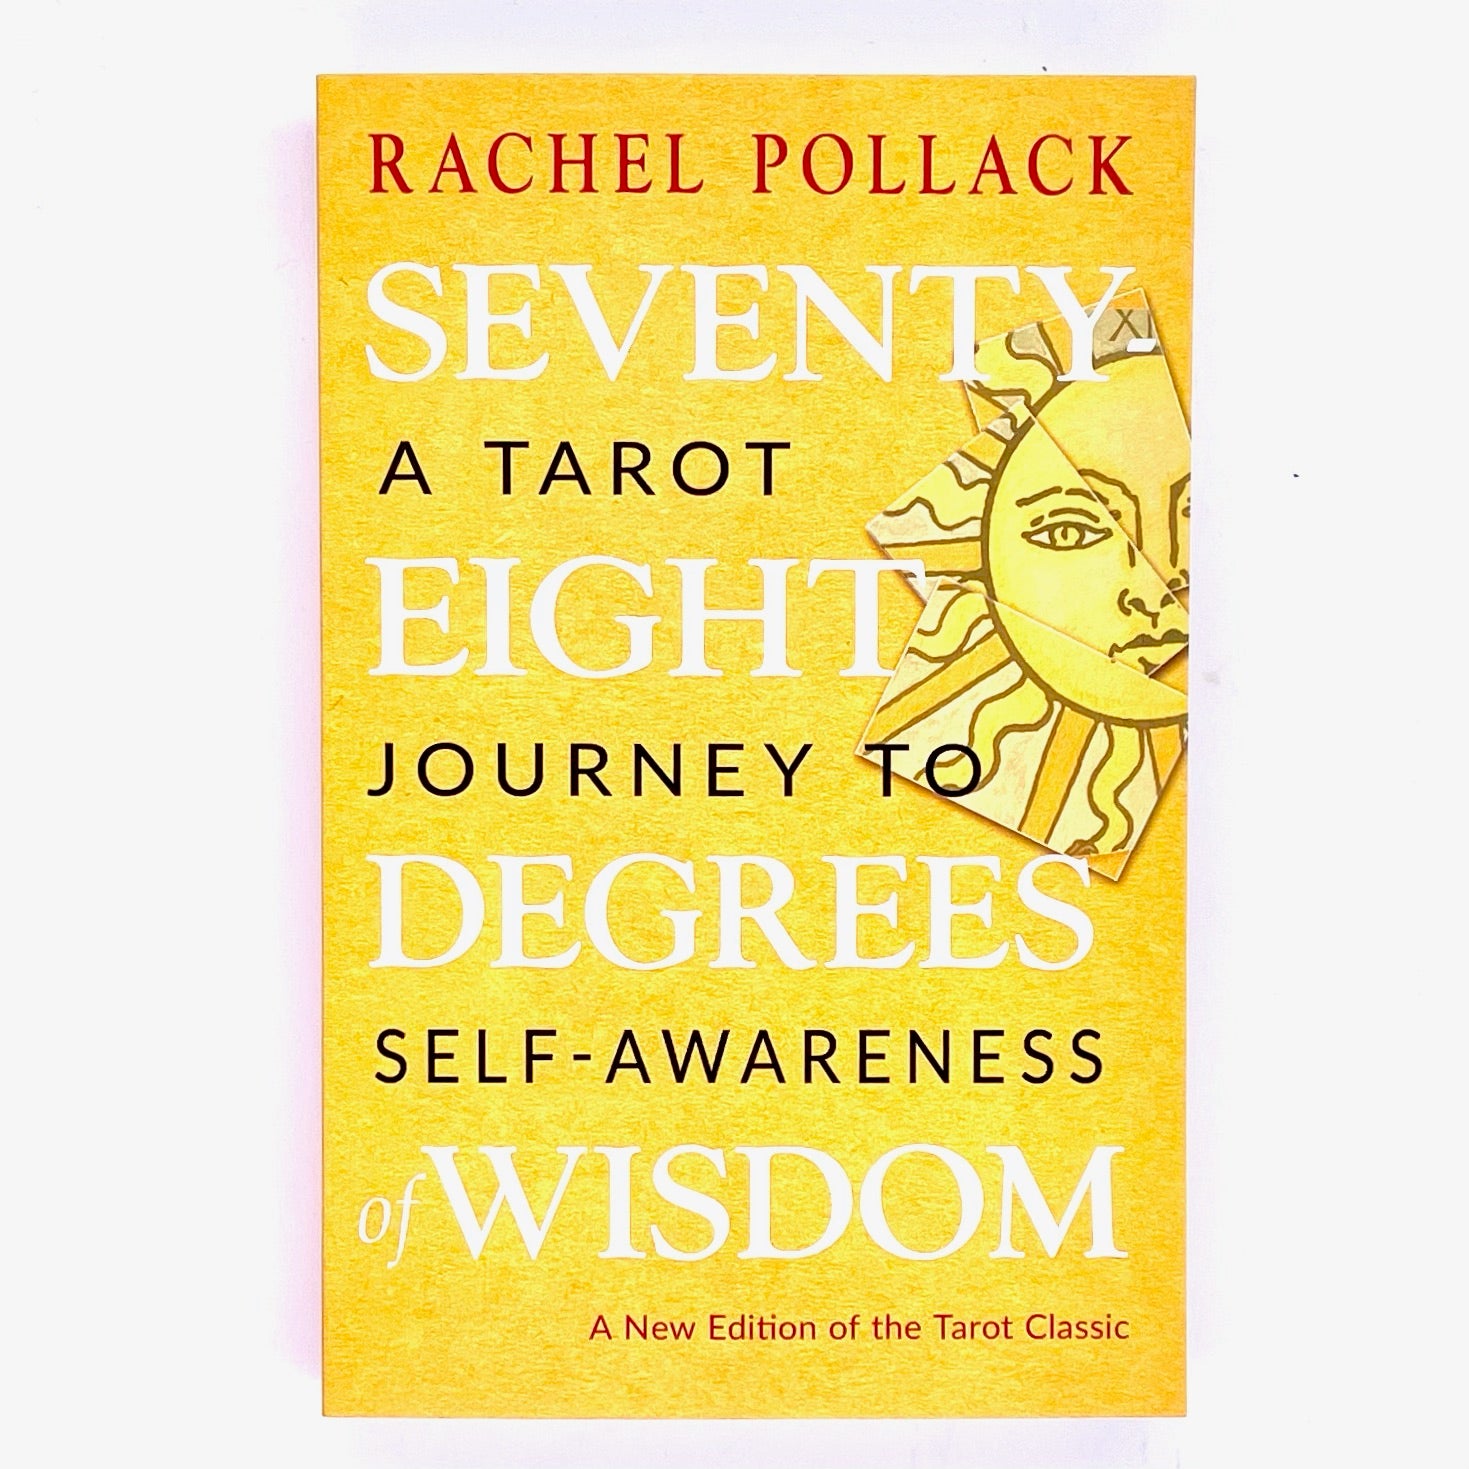 Book cover of Seventy Eight Degrees of Wisdom, a tarot journey to self awareness by Rachel Pollack.